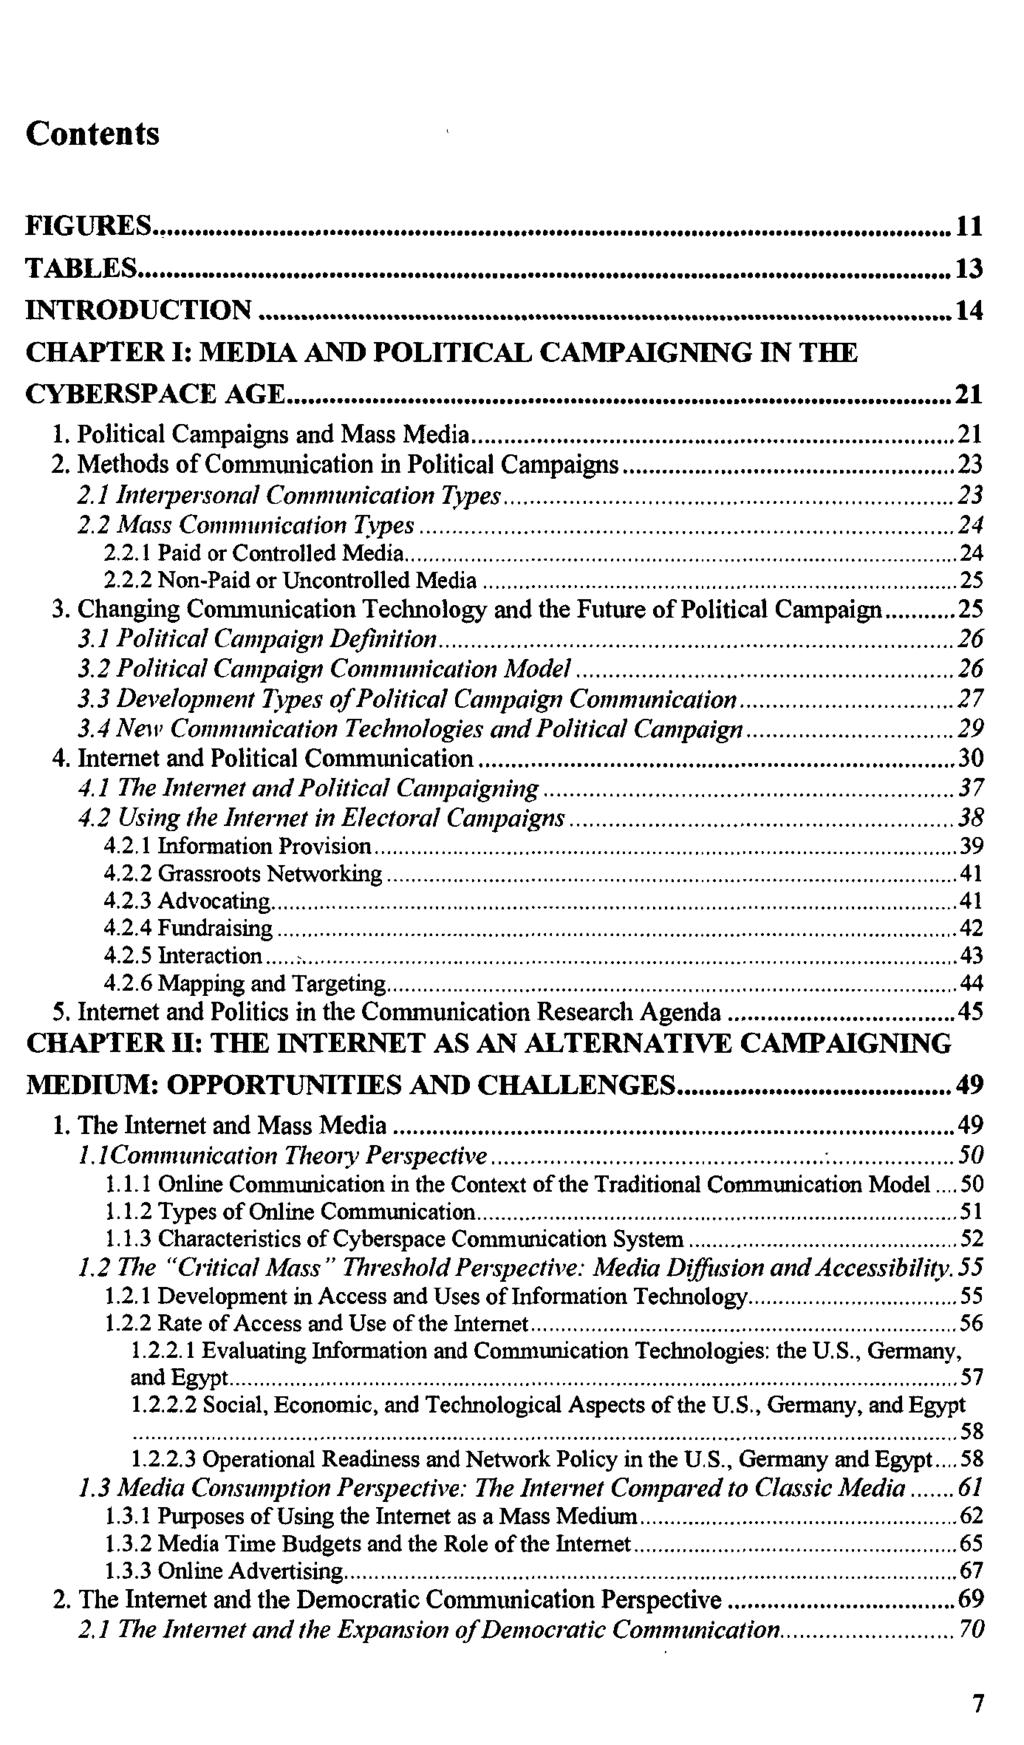 Contents FIGURES 11 TABLES 13 INTRODUCTION 14 CHAPTER I: MEDIA AND POLITICAL CAMPAIGNING IN THE CYBERSPACE AGE 21 1. Political Campaigns and Mass Media 21 2.